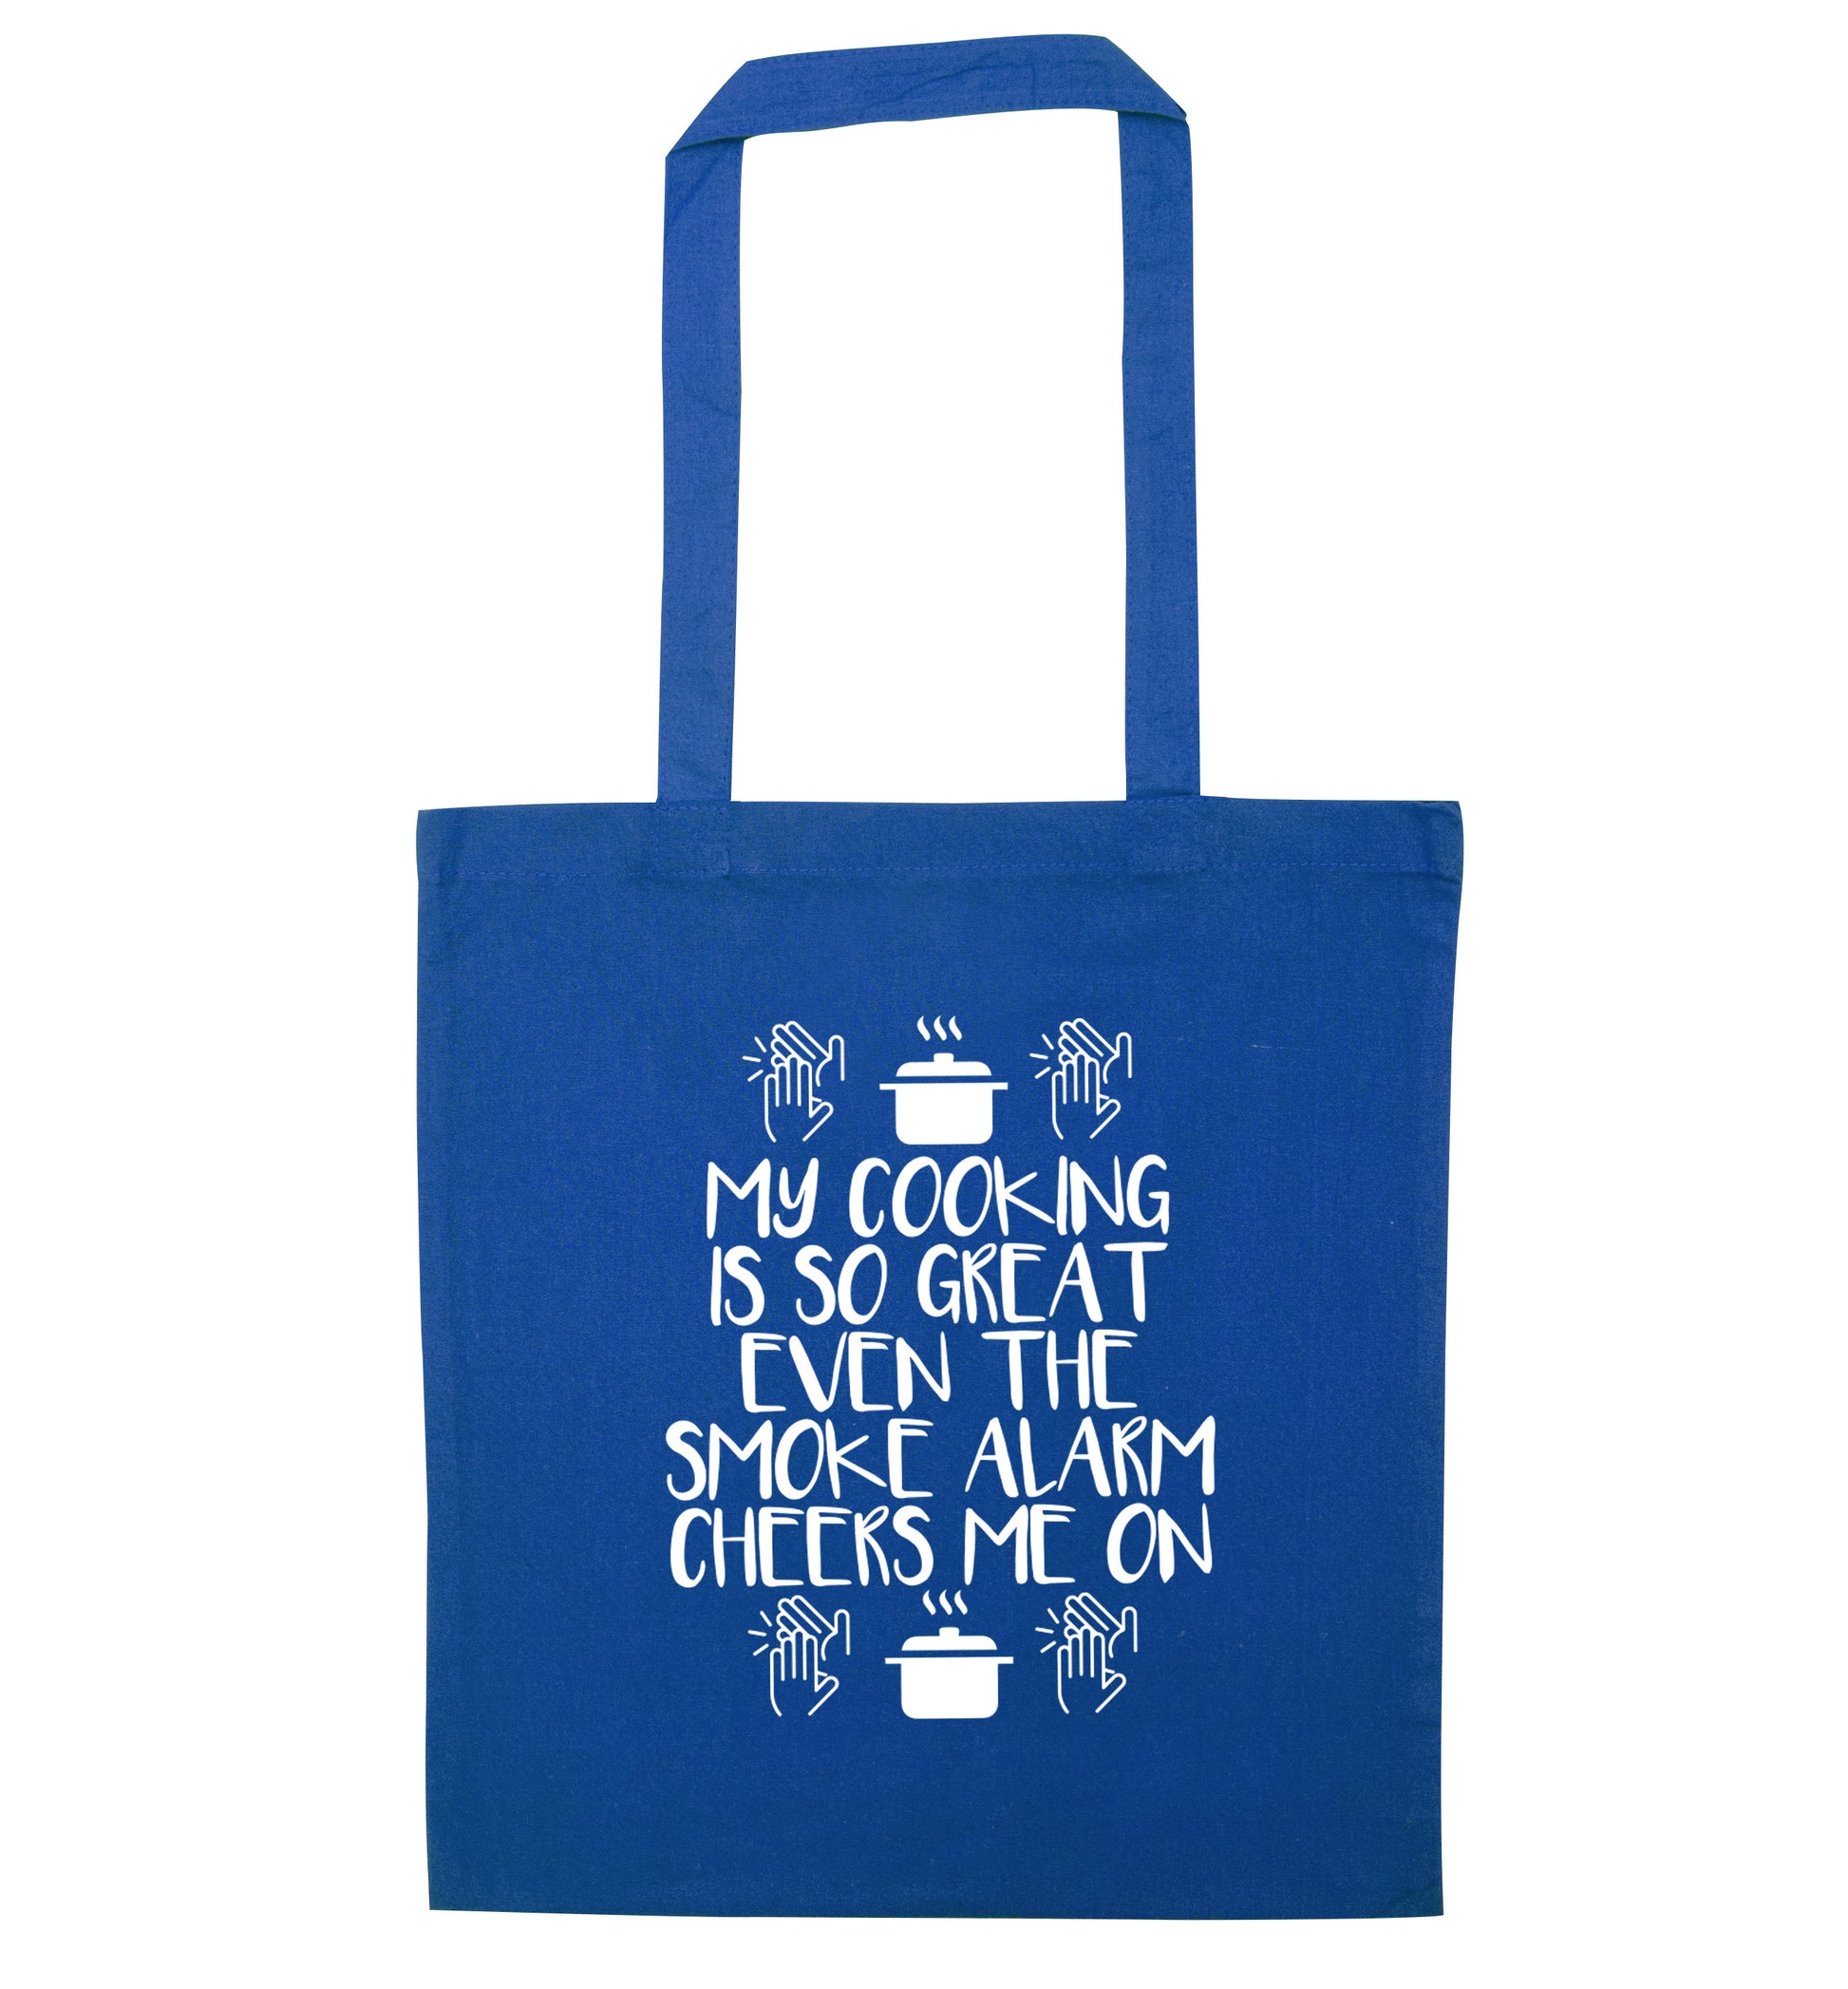 My cooking is so great even the smoke alarm cheers me on! blue tote bag